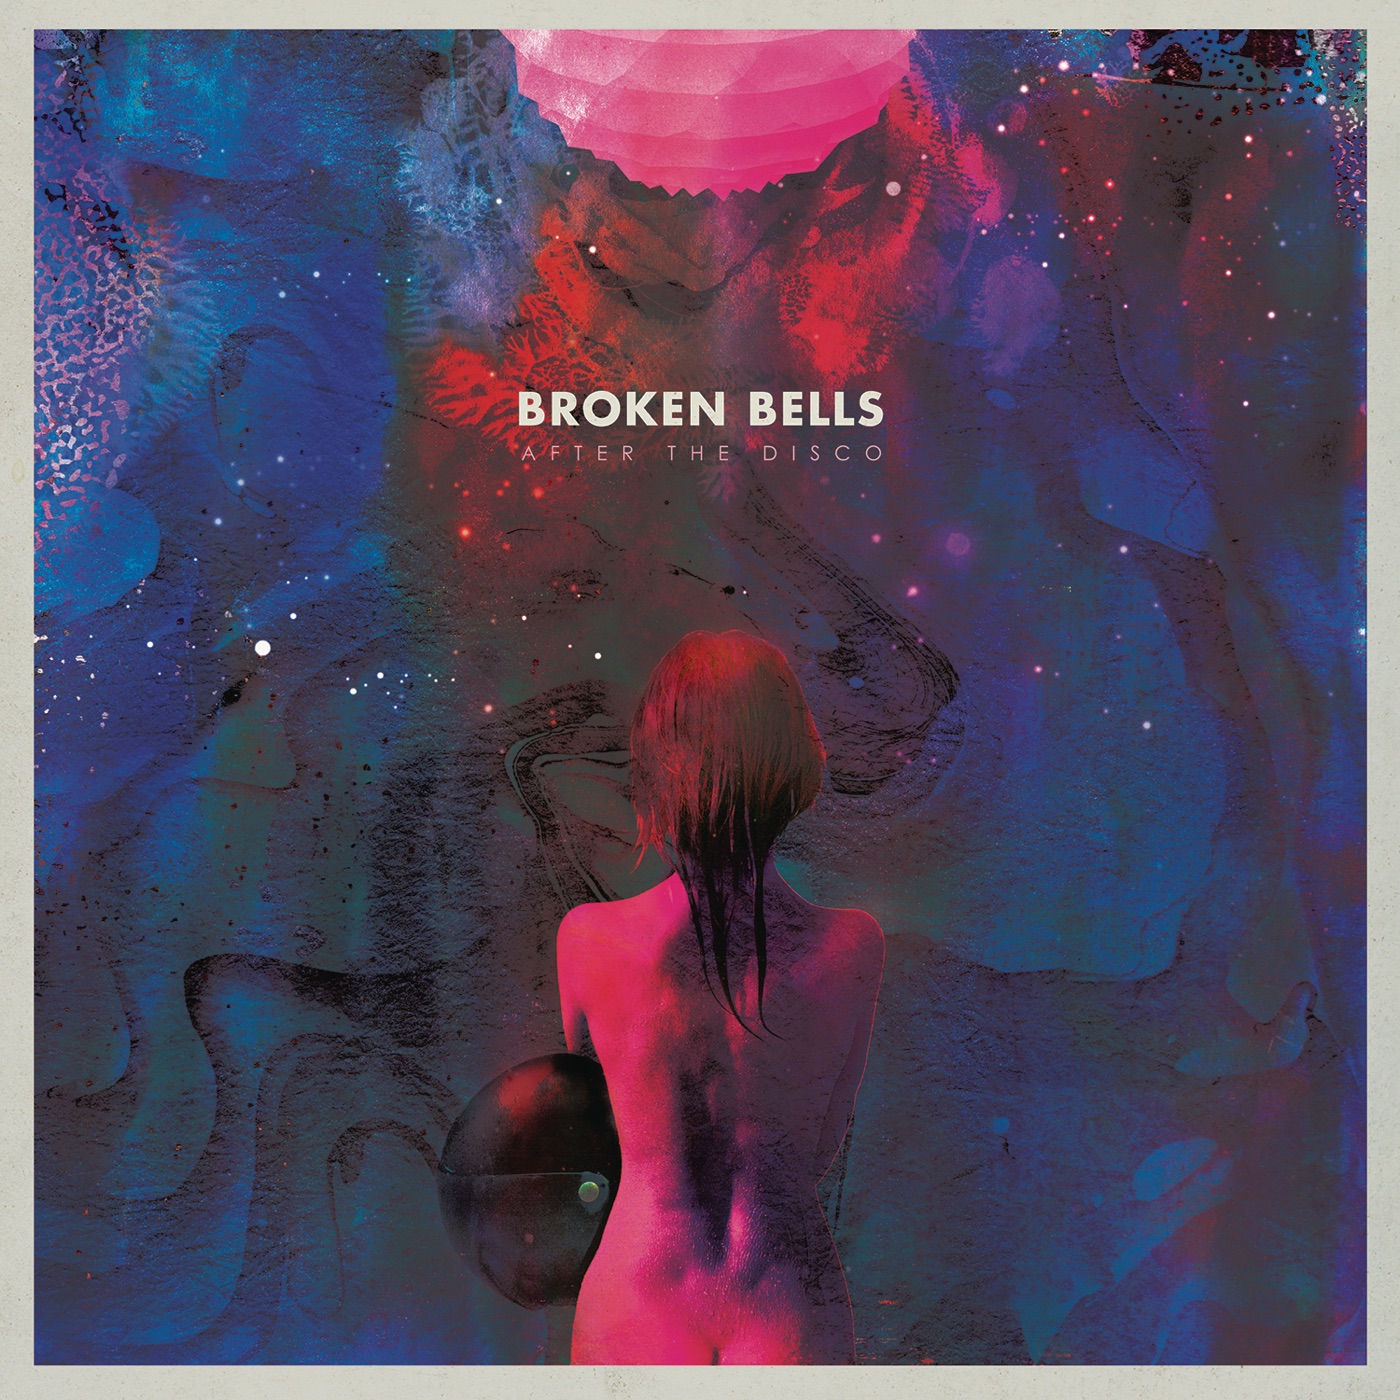 After the Disco by Broken Bells